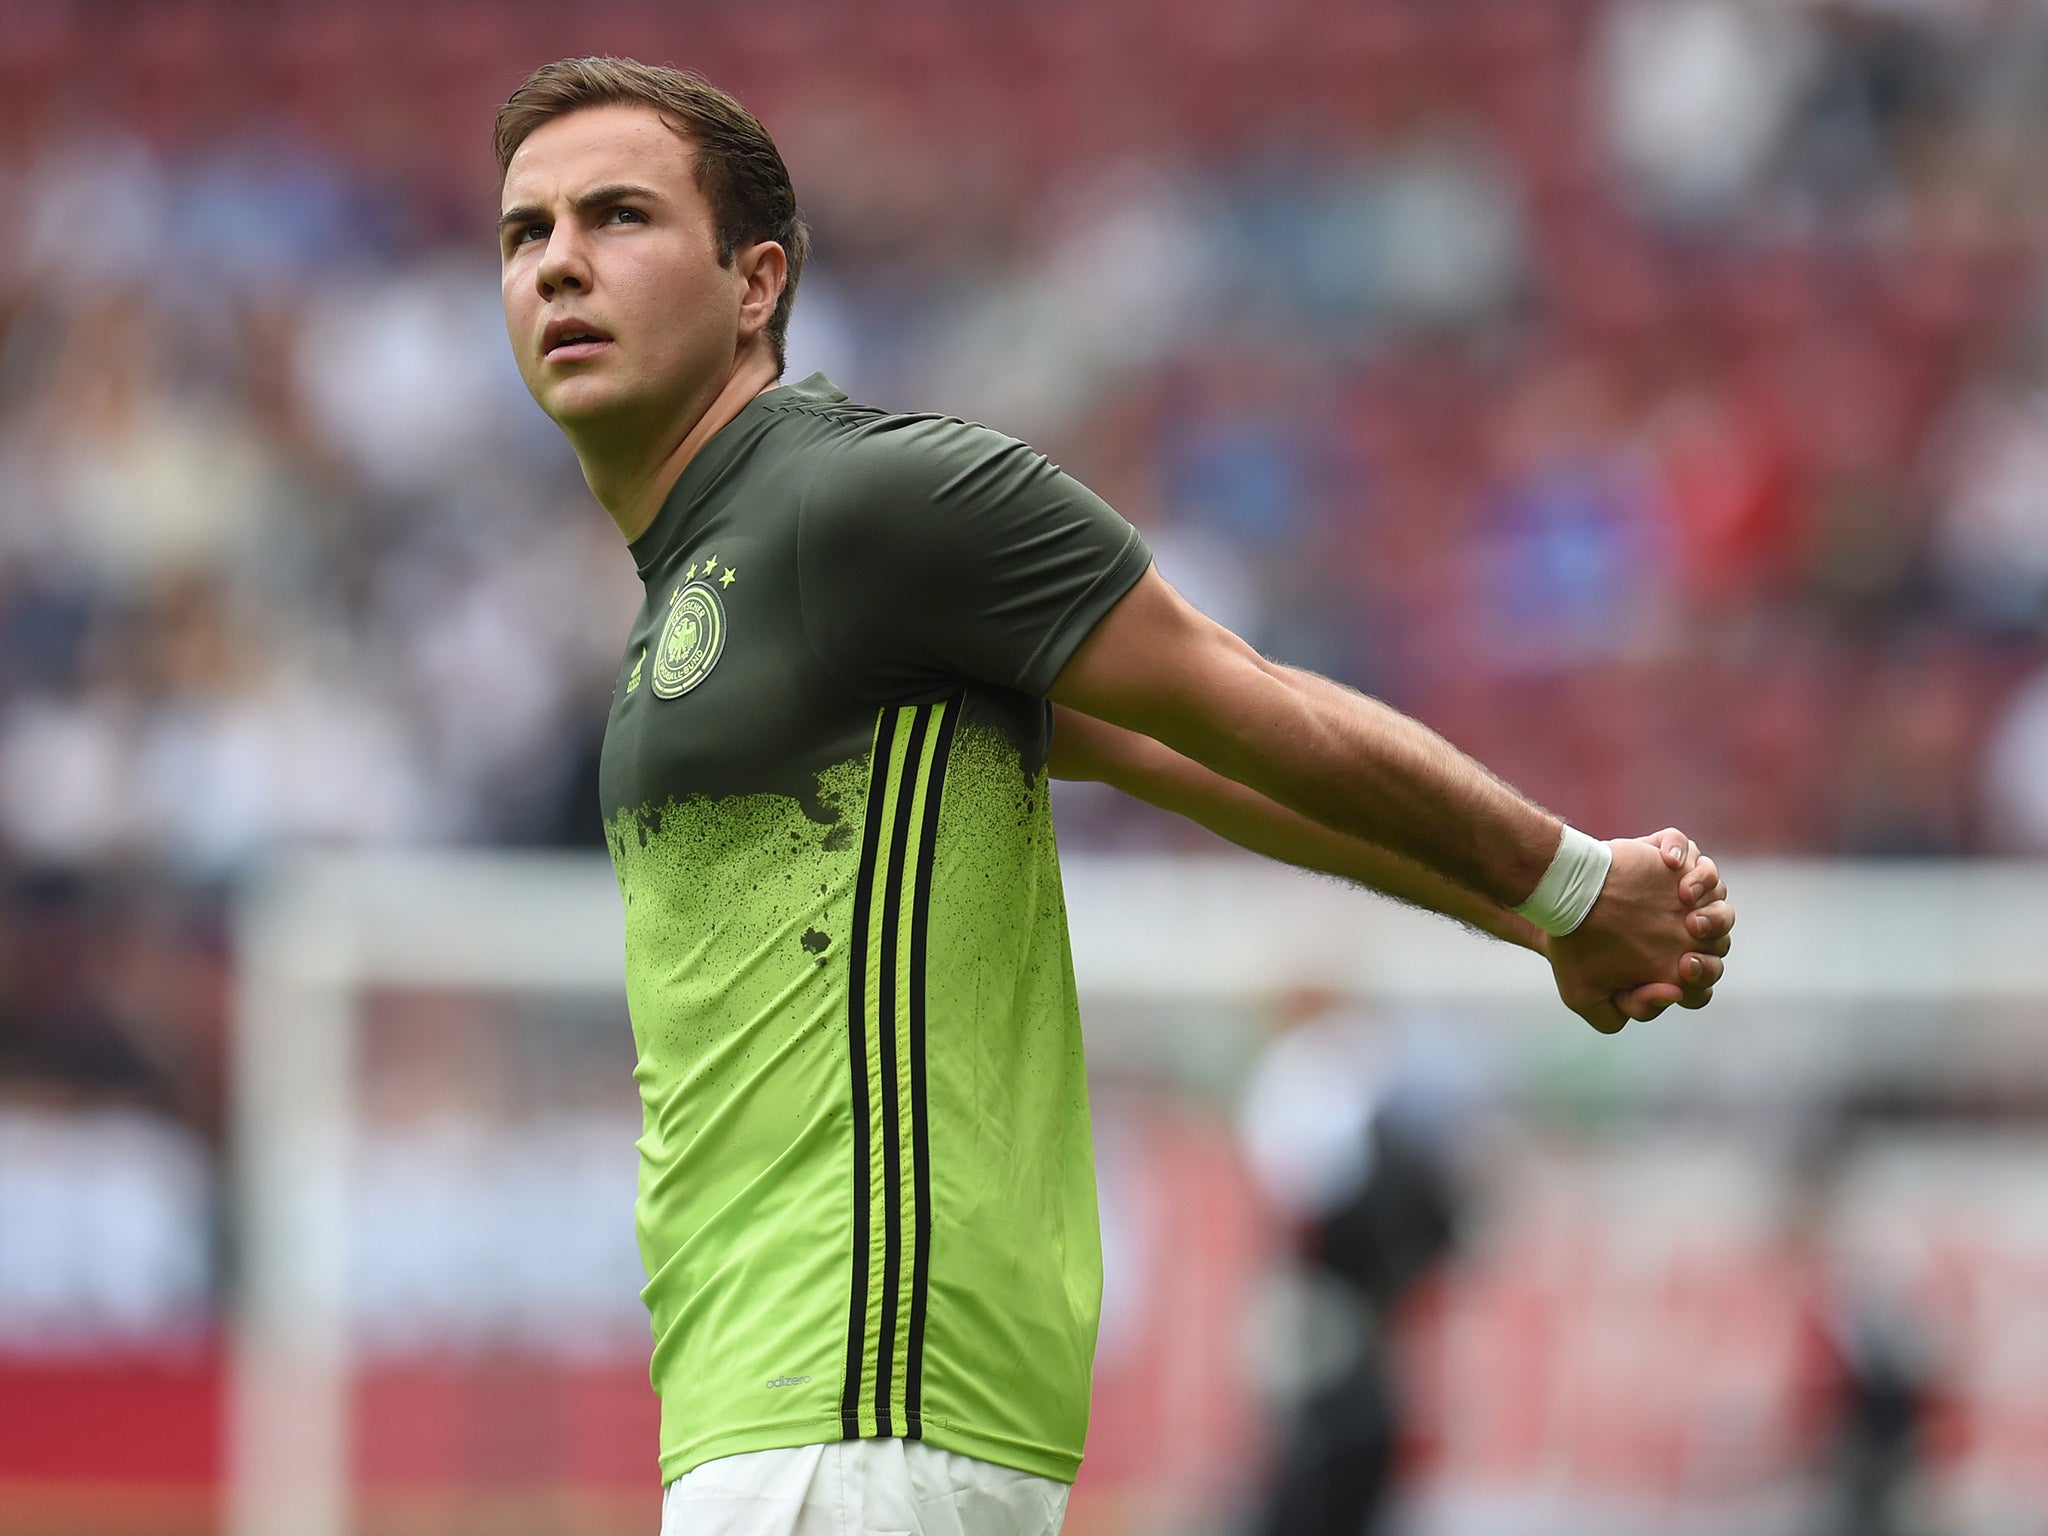 Mario Gotze has struggled to make an impression in the two years since his World Cup final heroics